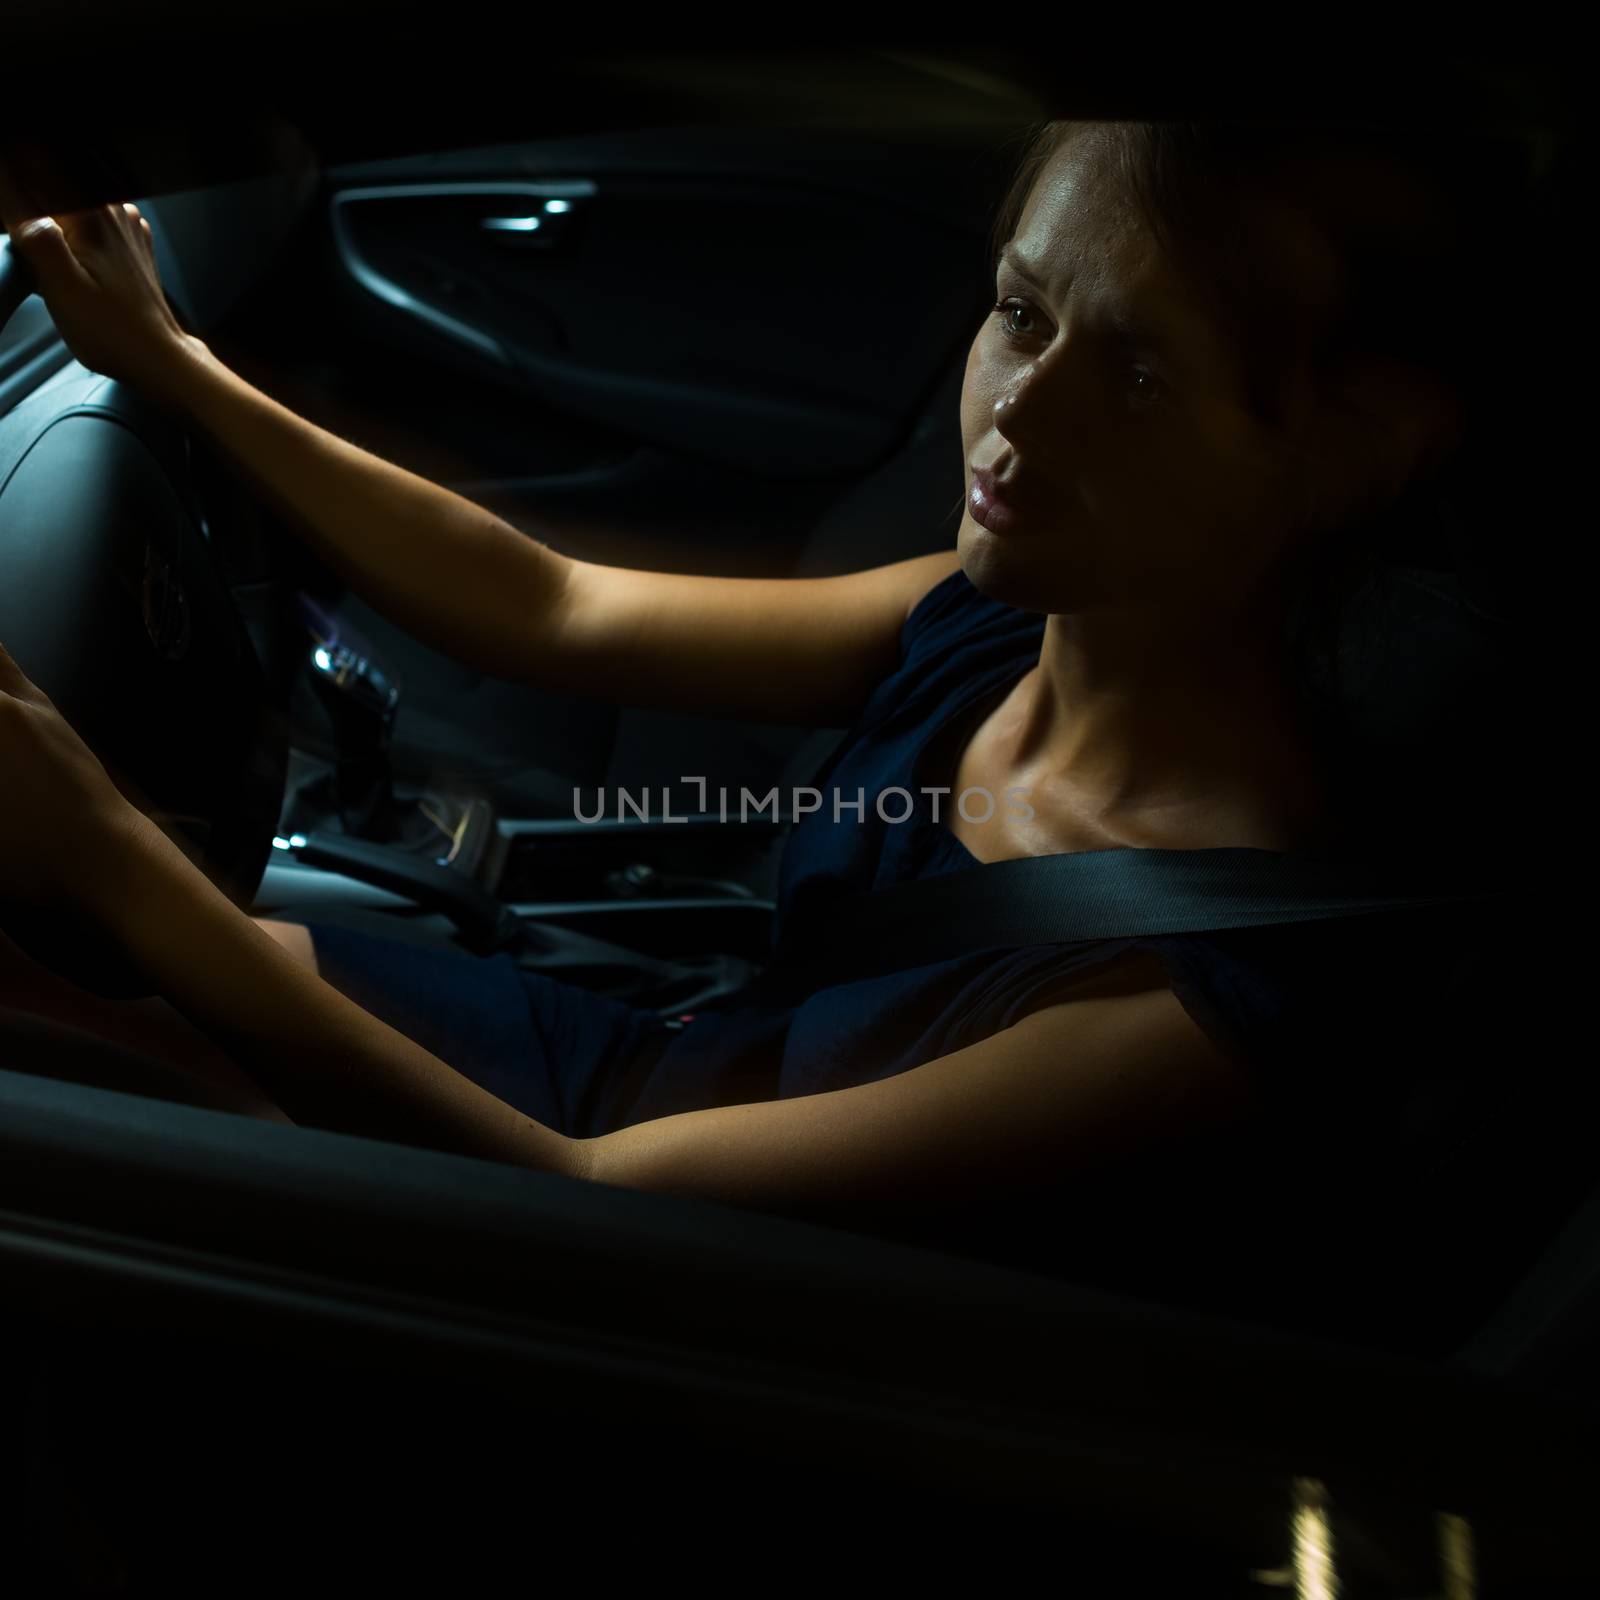 Driving a car at night - pretty, young woman driving her modern car at night, in a city (shallow DOF; color toned image)